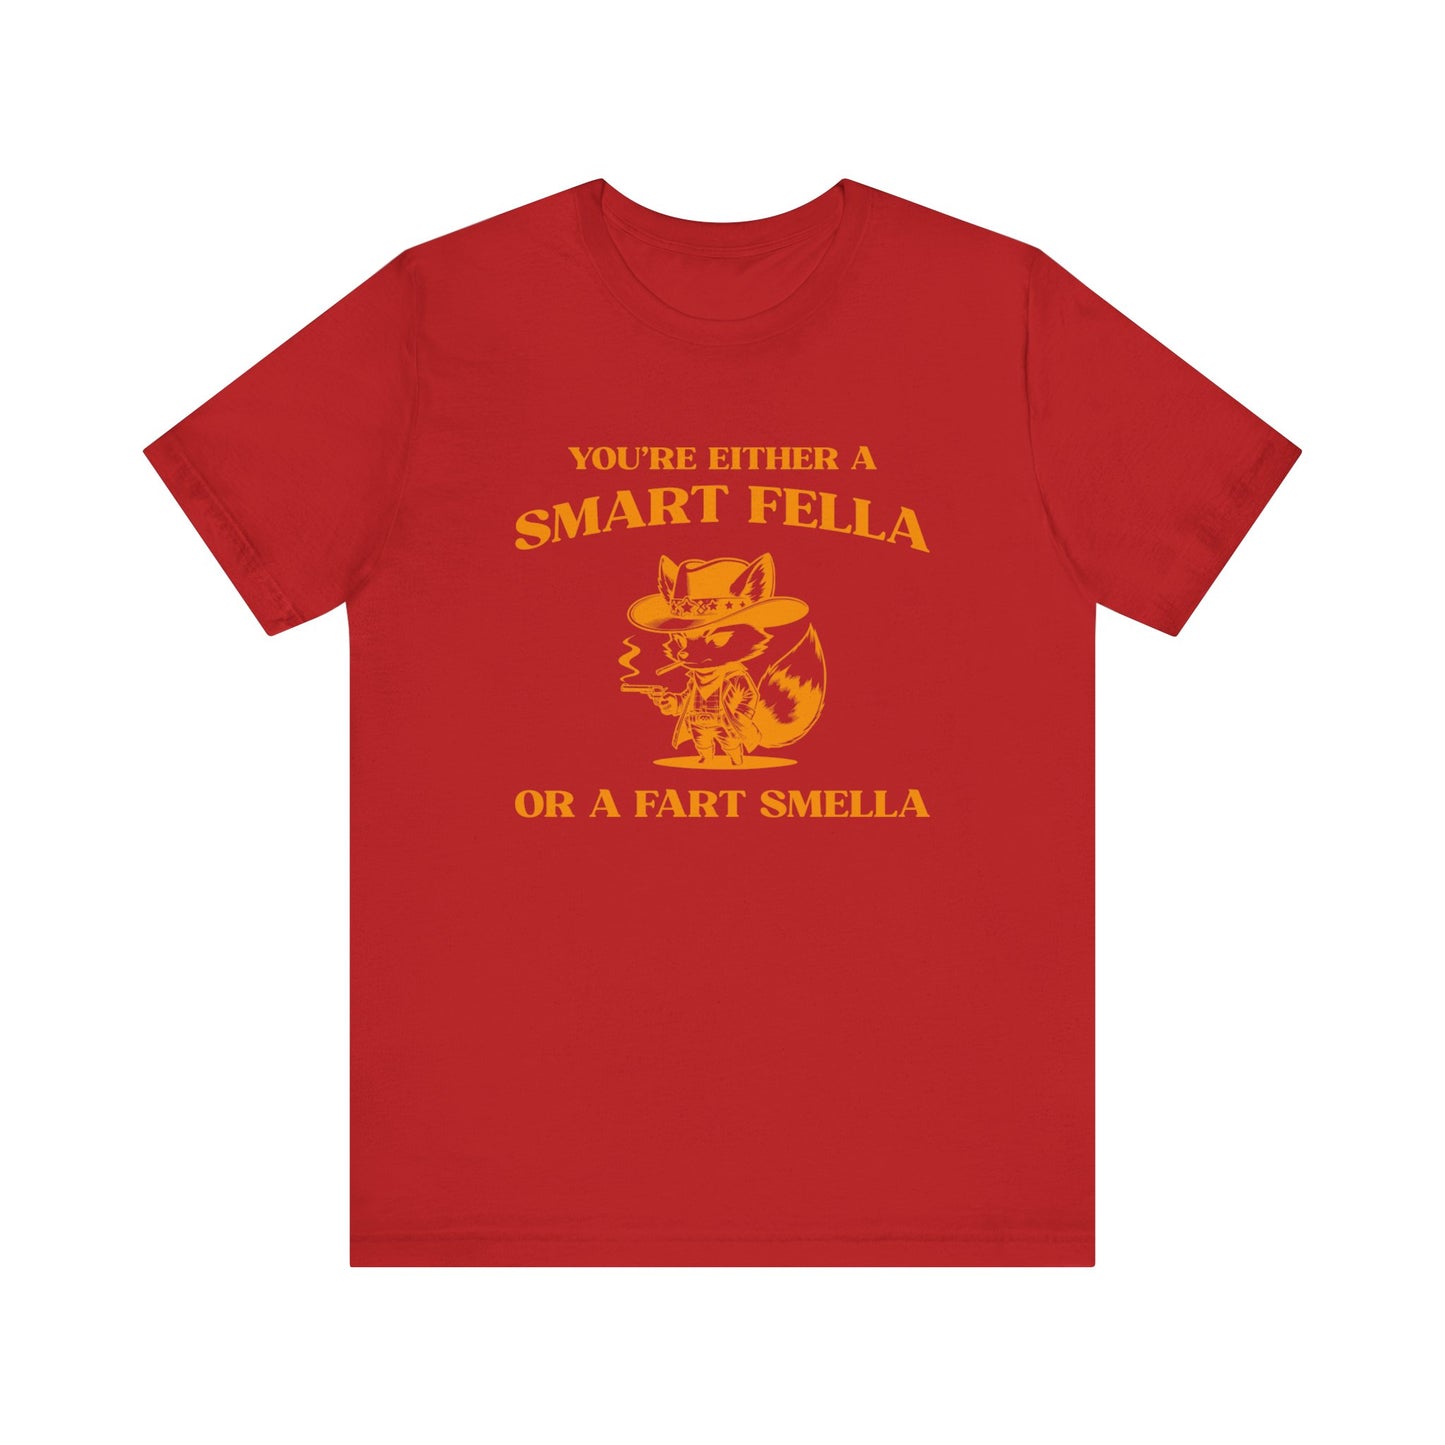 You Are Either A Smart Fella Or A Fart Smella Shirt, Funny Shirt, Funny Meme Shirt, Silly Meme Shirt, Mothers day Shirt, T1585